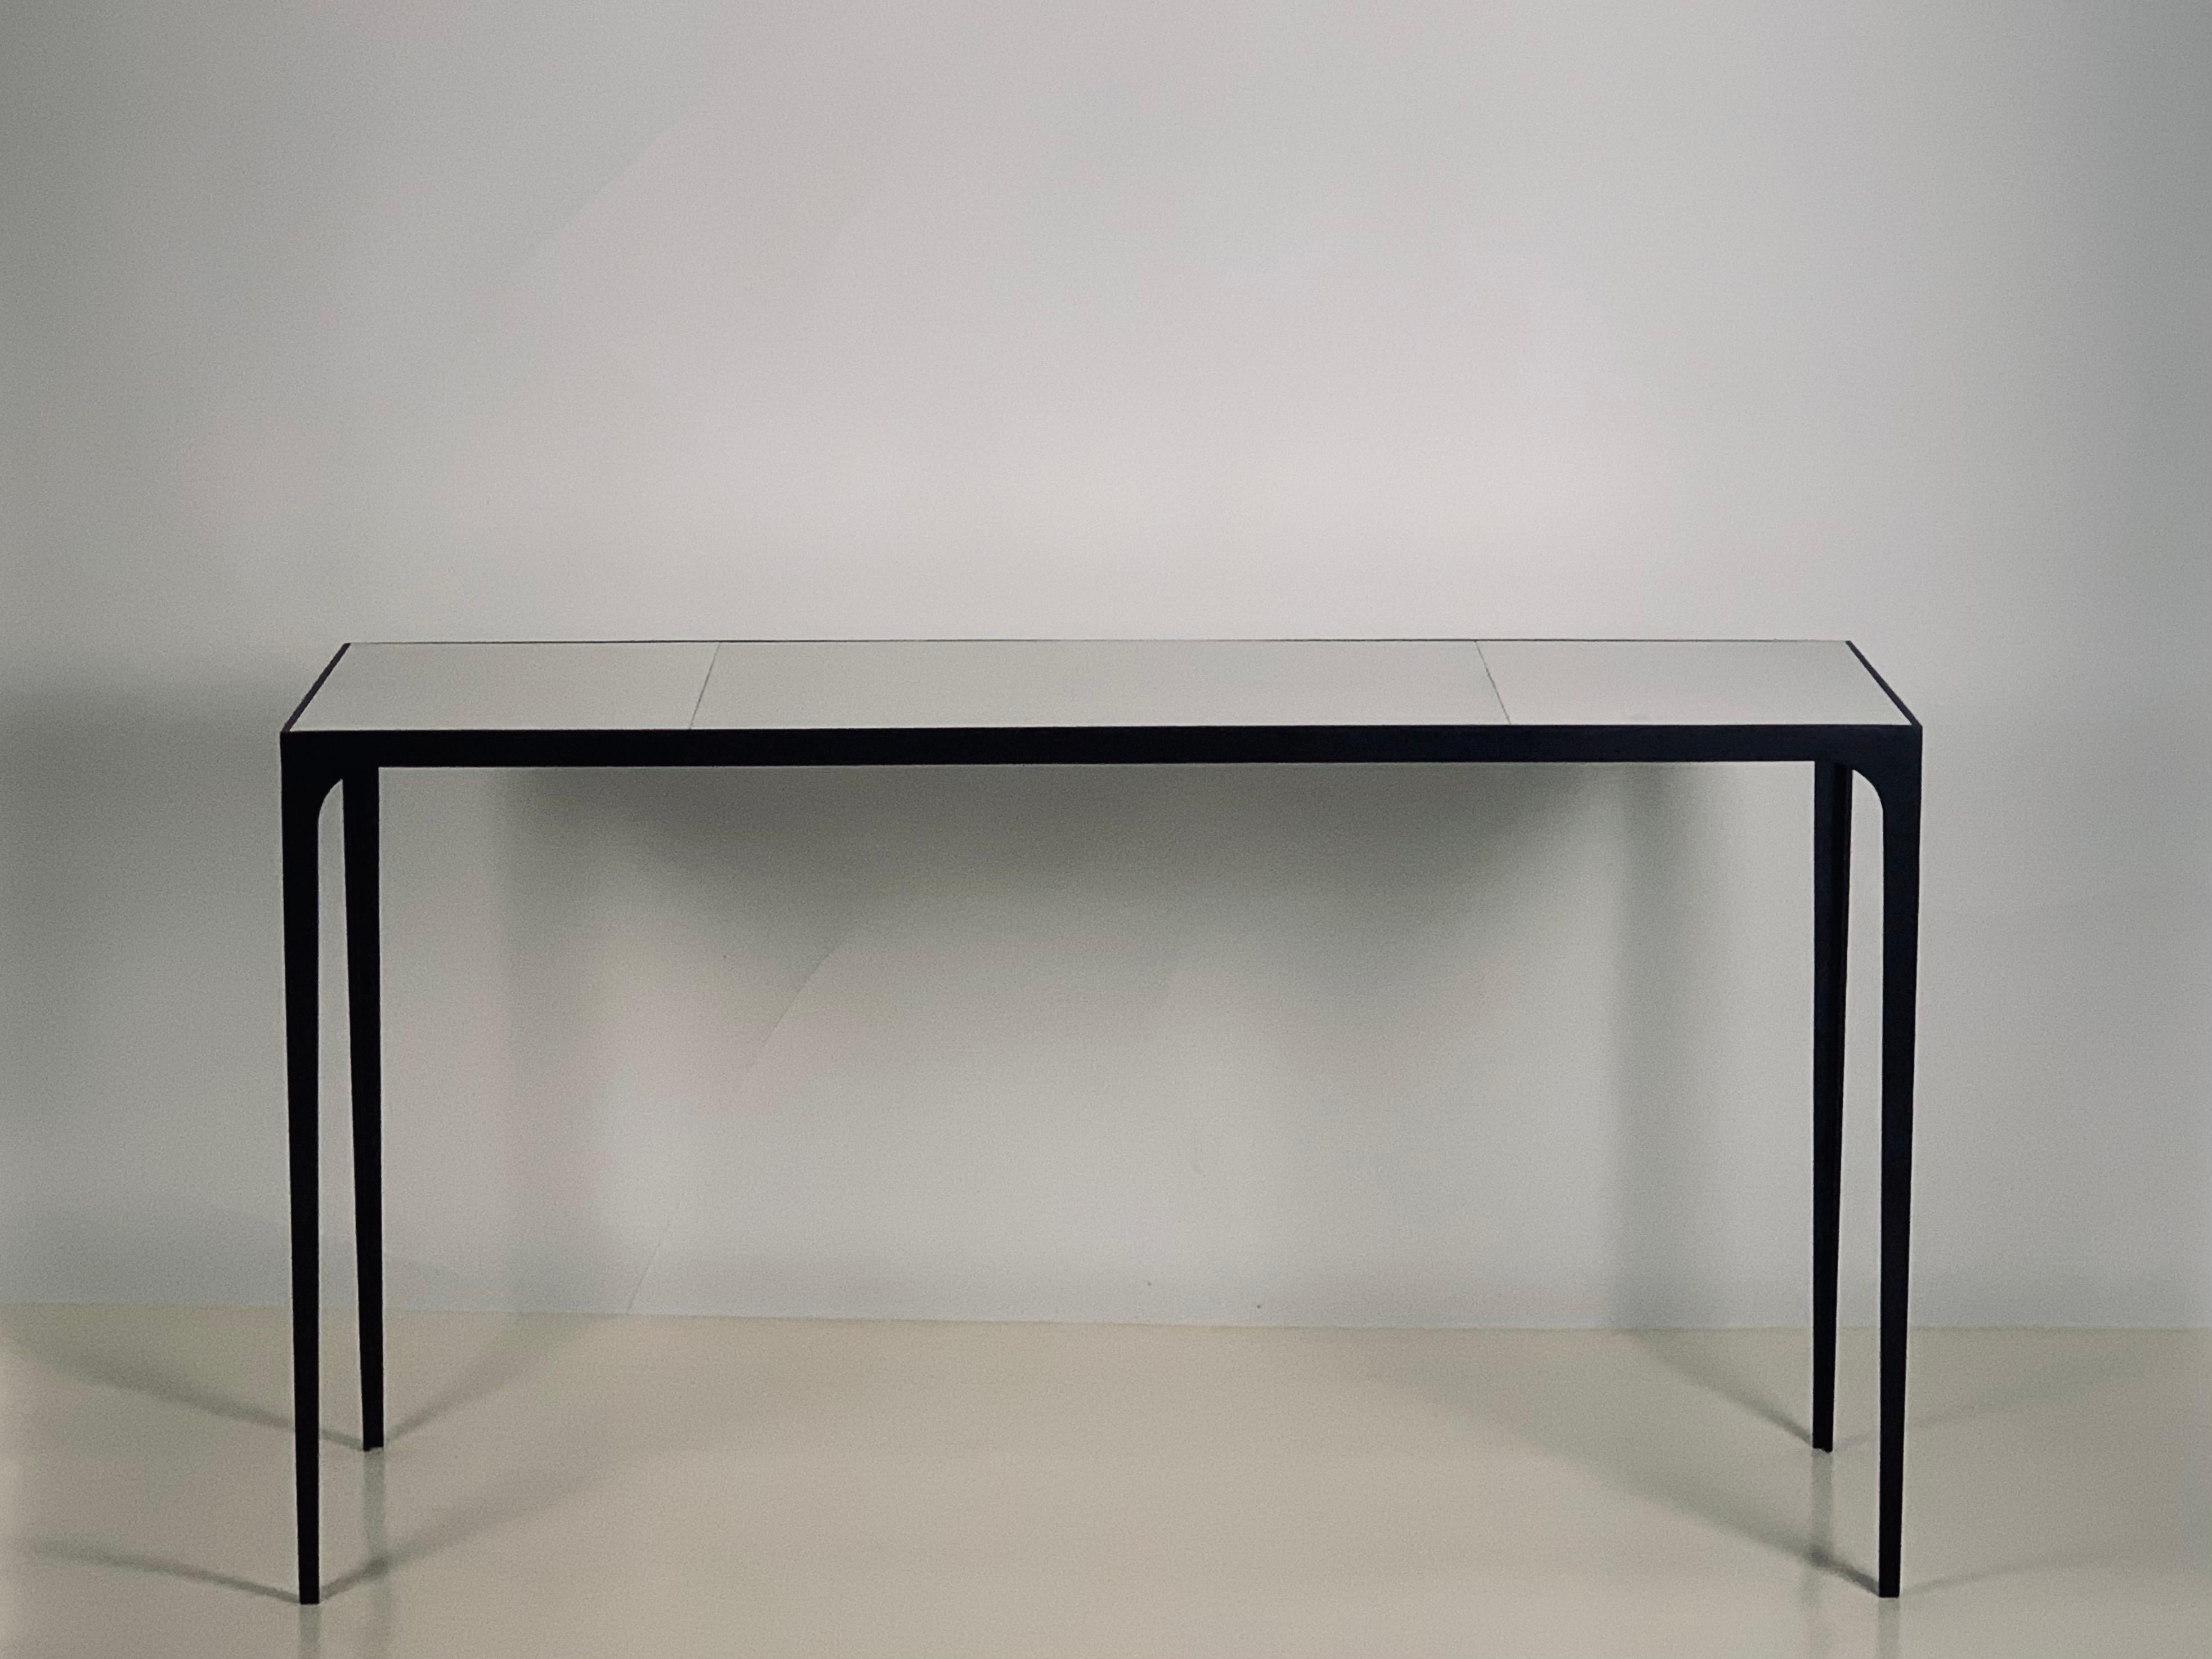 Wide 'Esquisse' parchemin console or library table from our exclusive Design Frères line. Chic combination of a slender blackened iron base with an inset goatskin (parchemin) clad top. Impressive proportions. Understated elegance. Timeless.